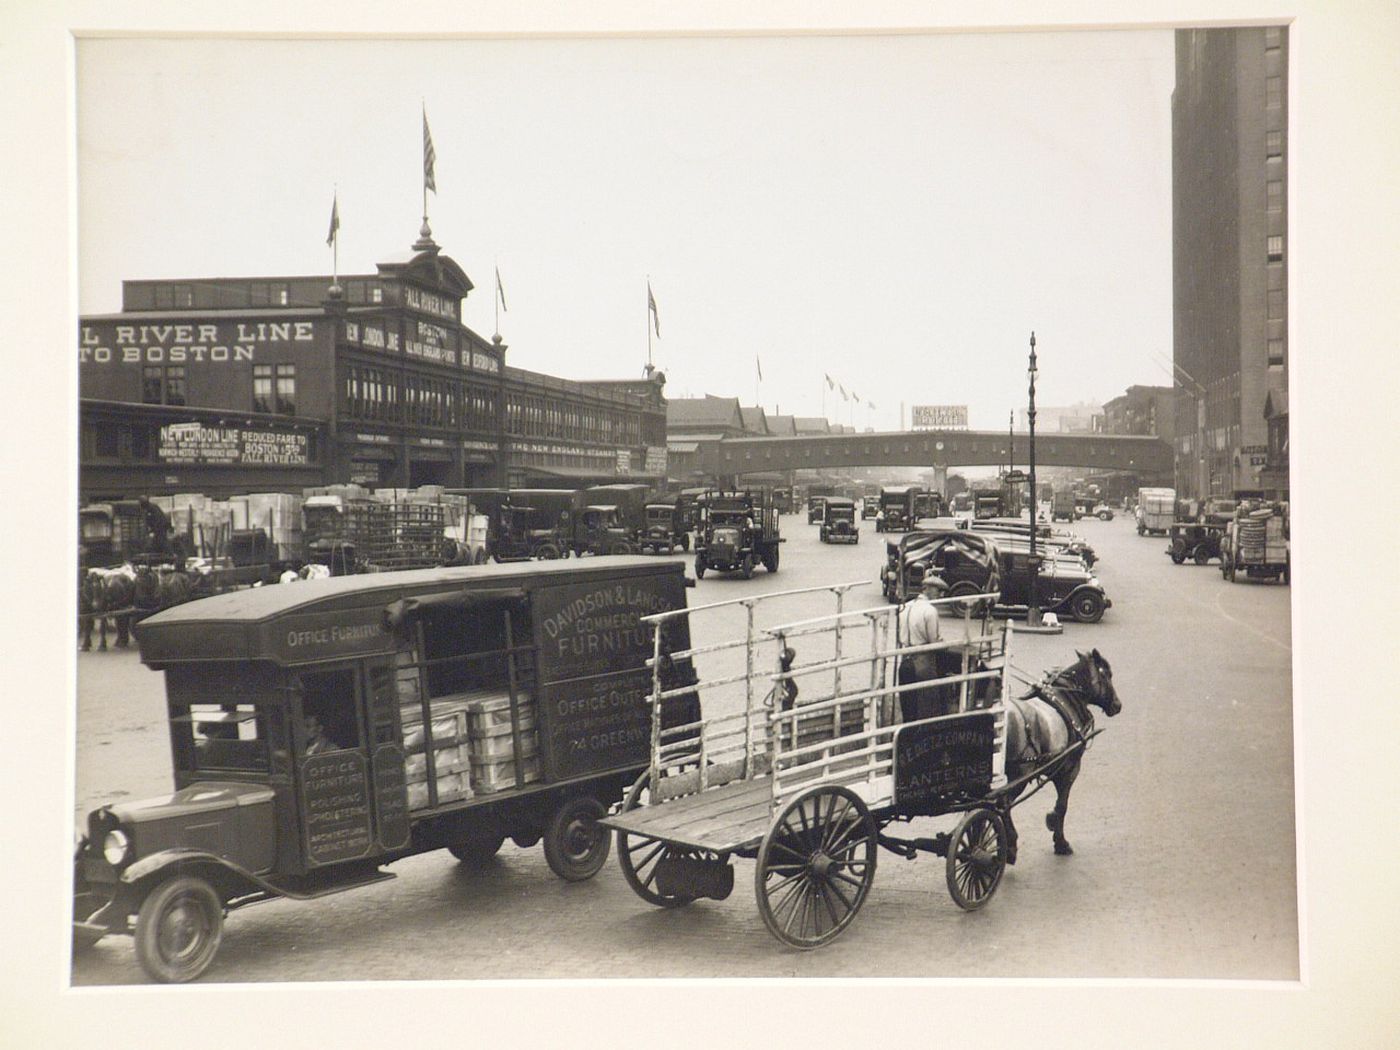 Waterfront Street, with All River Line Terminal on left, New York City, New York